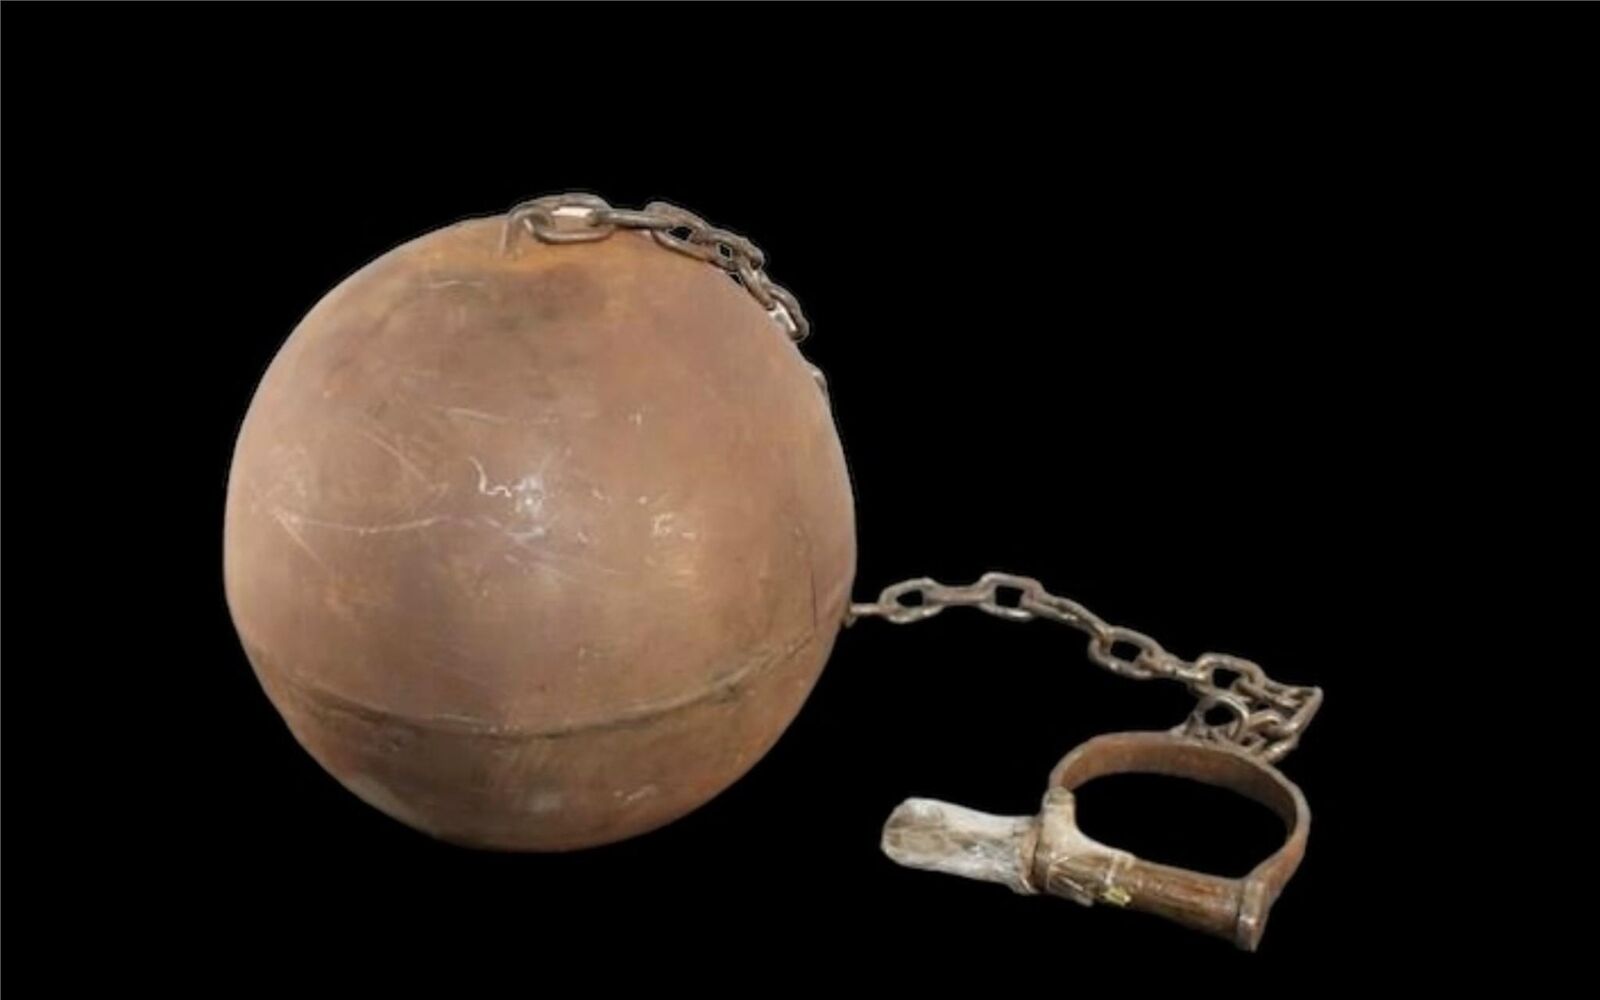 Vintage Antique Collectible Medieval Style Metal Ball & Chain Prison Jail 17lbs